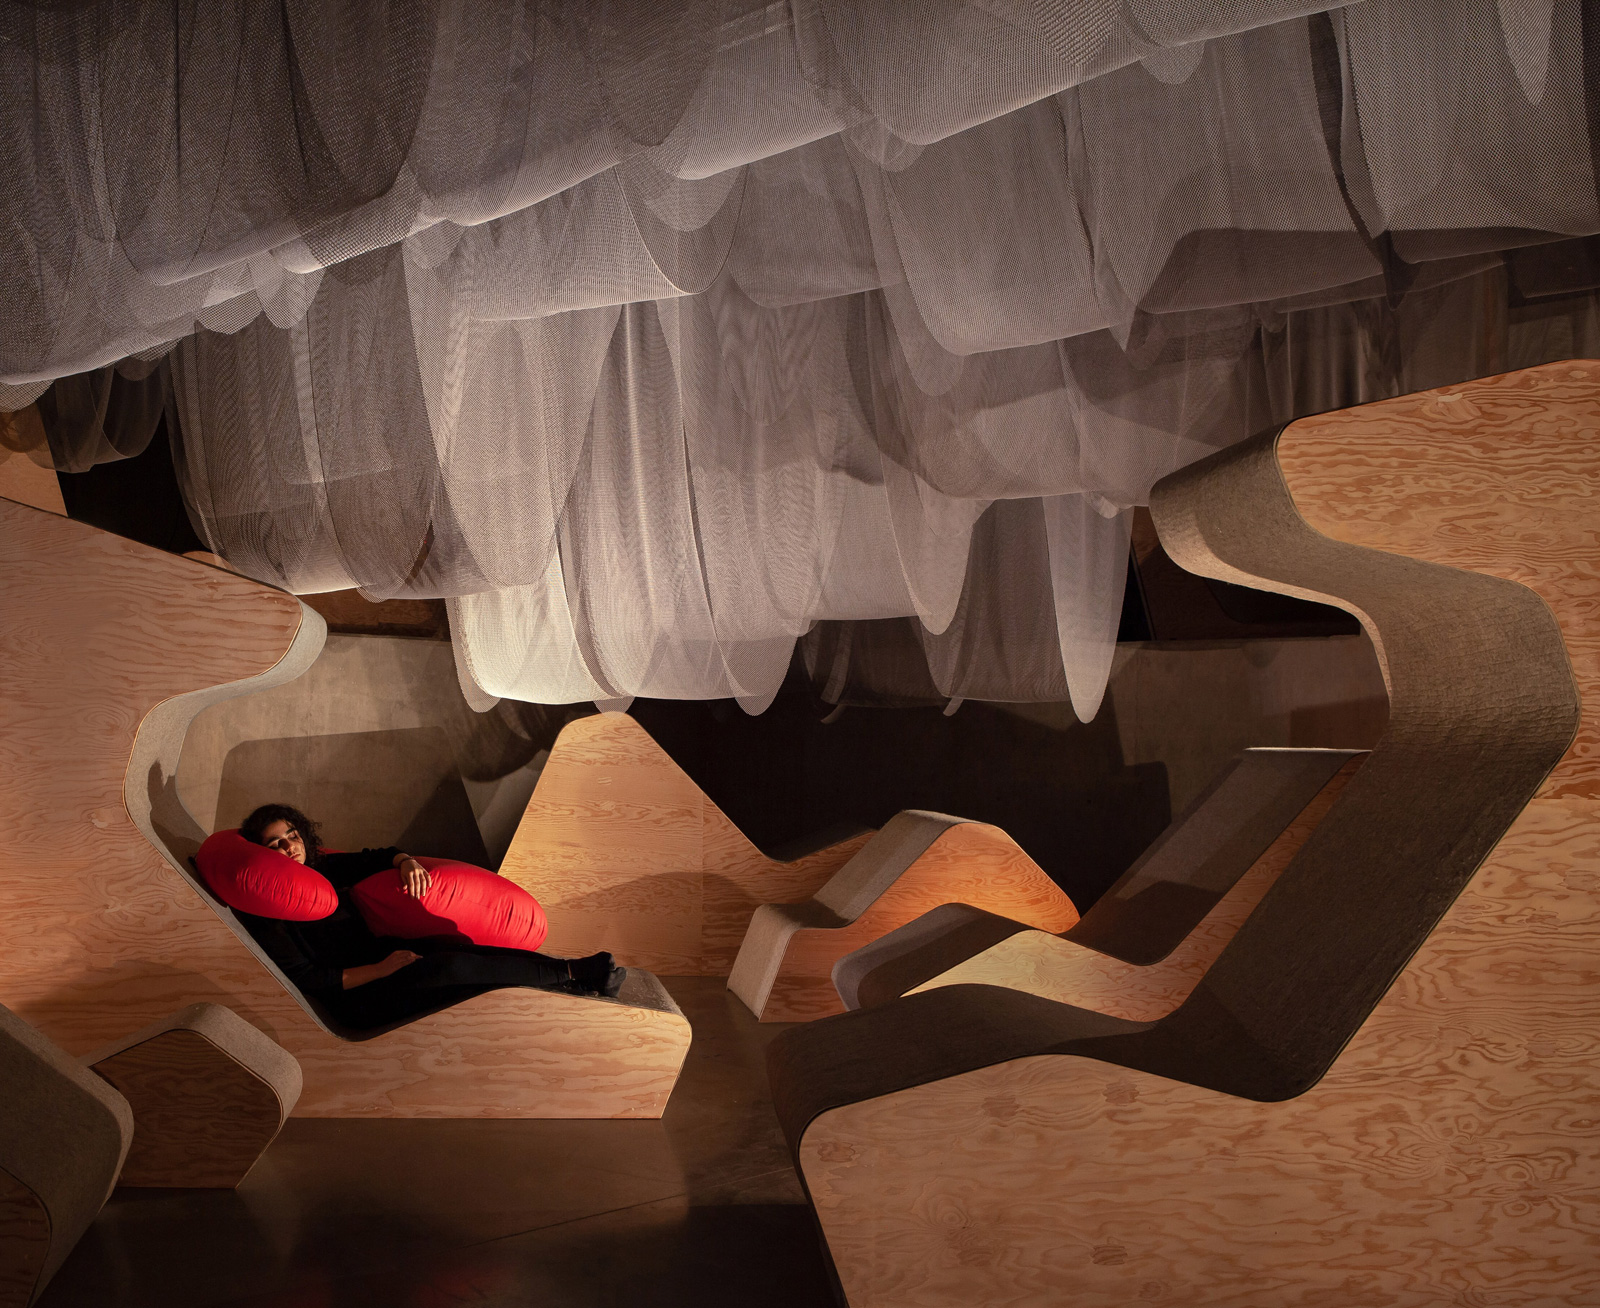 New Circadia (adventures in mental spelunking) is the inaugural installation at the new Architecture and Design Gallery – Daniels Faculty of Architecture, Design and Landscaping